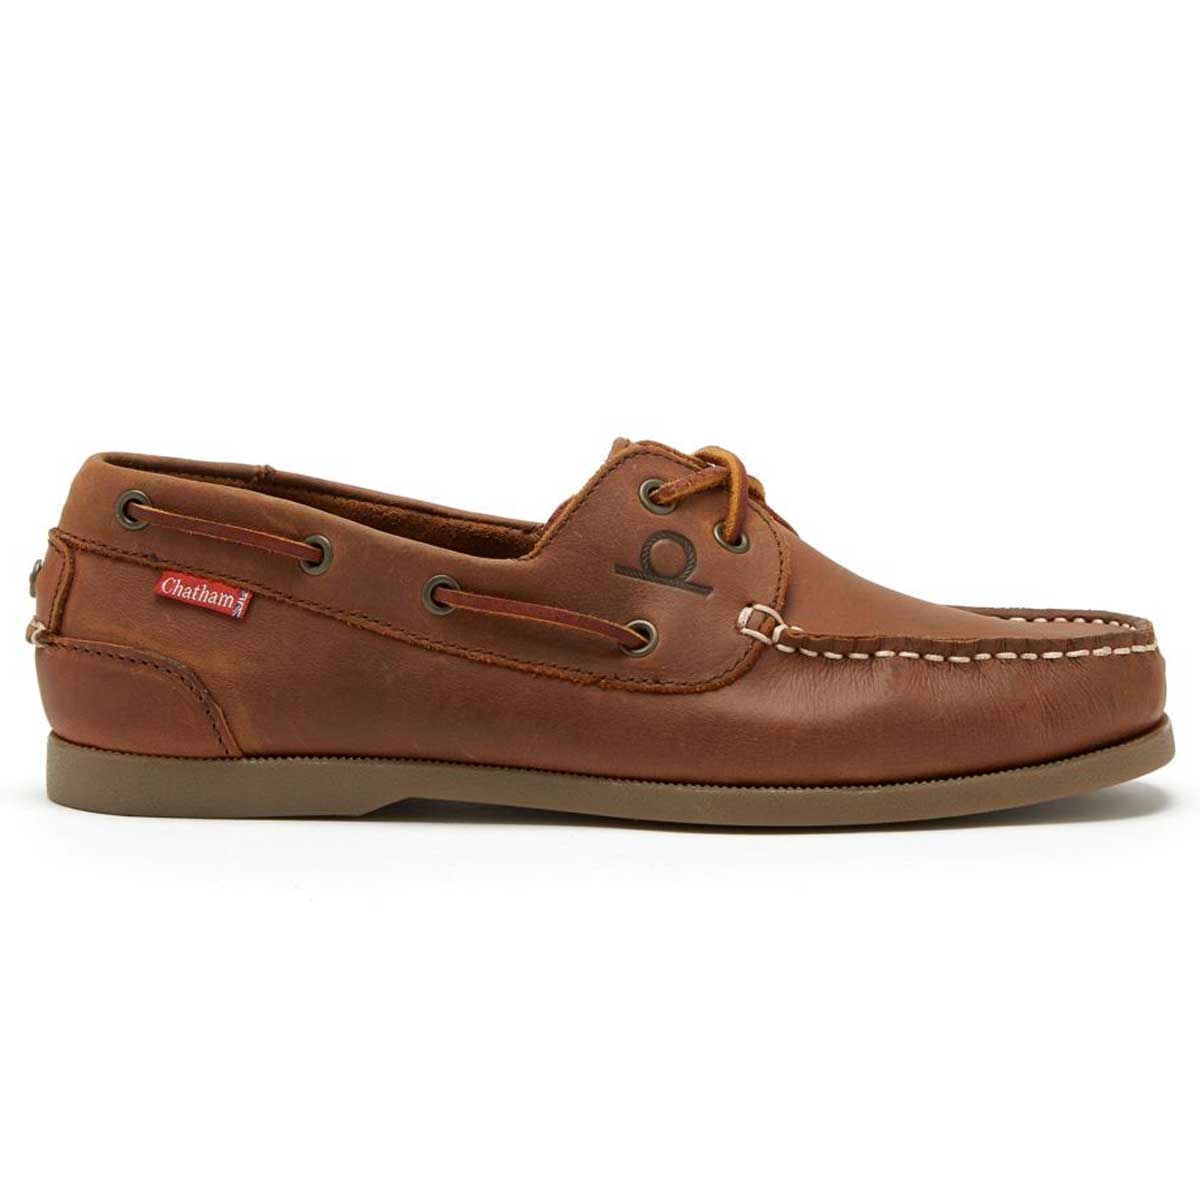 CHATHAM Galley II Leather Boat Shoes - Men's - Dark Tan